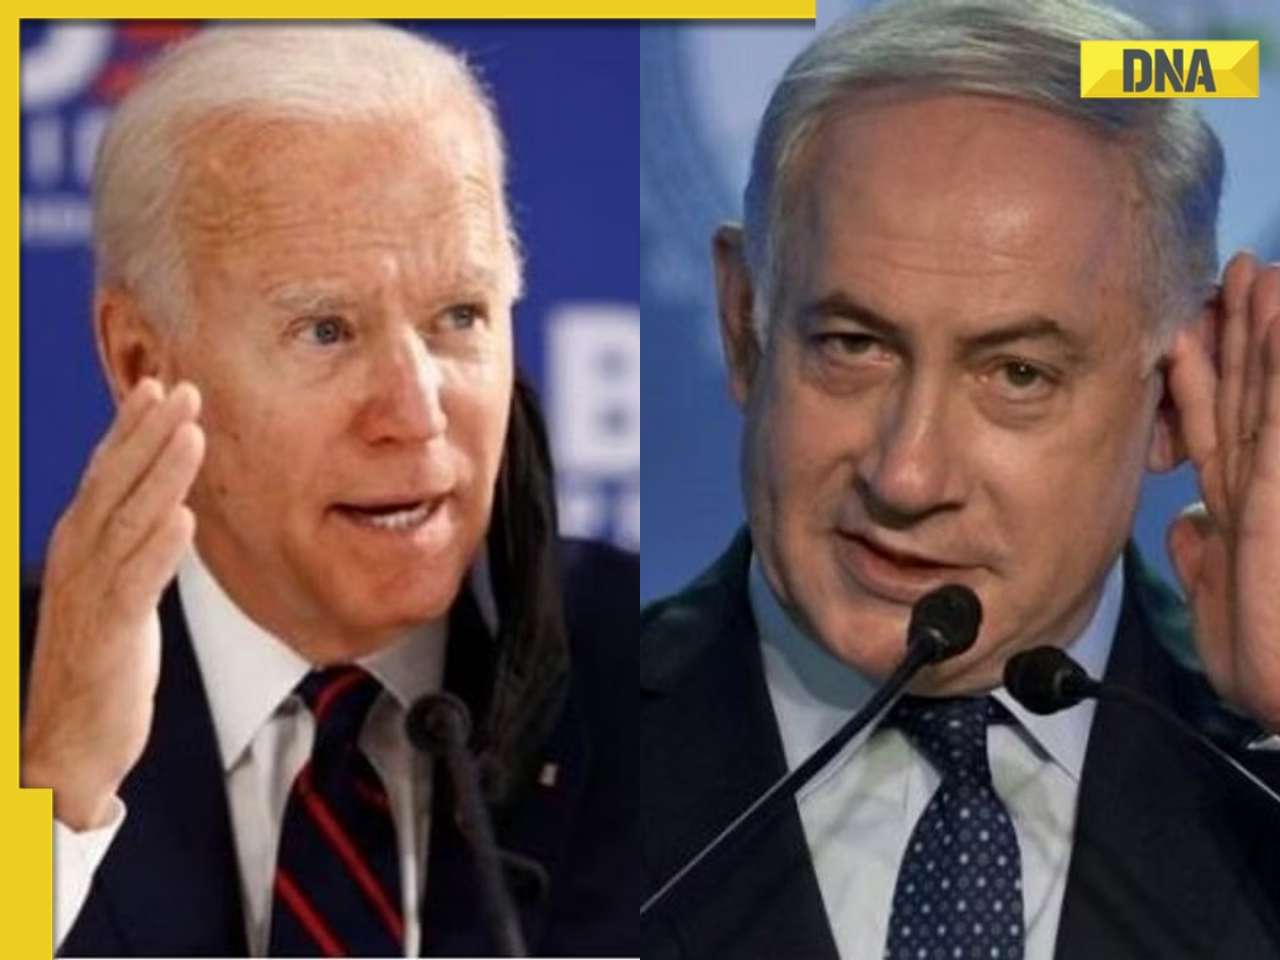 US President Joe Biden to speak with PM Netanyahu today amid protest over his support for Israel